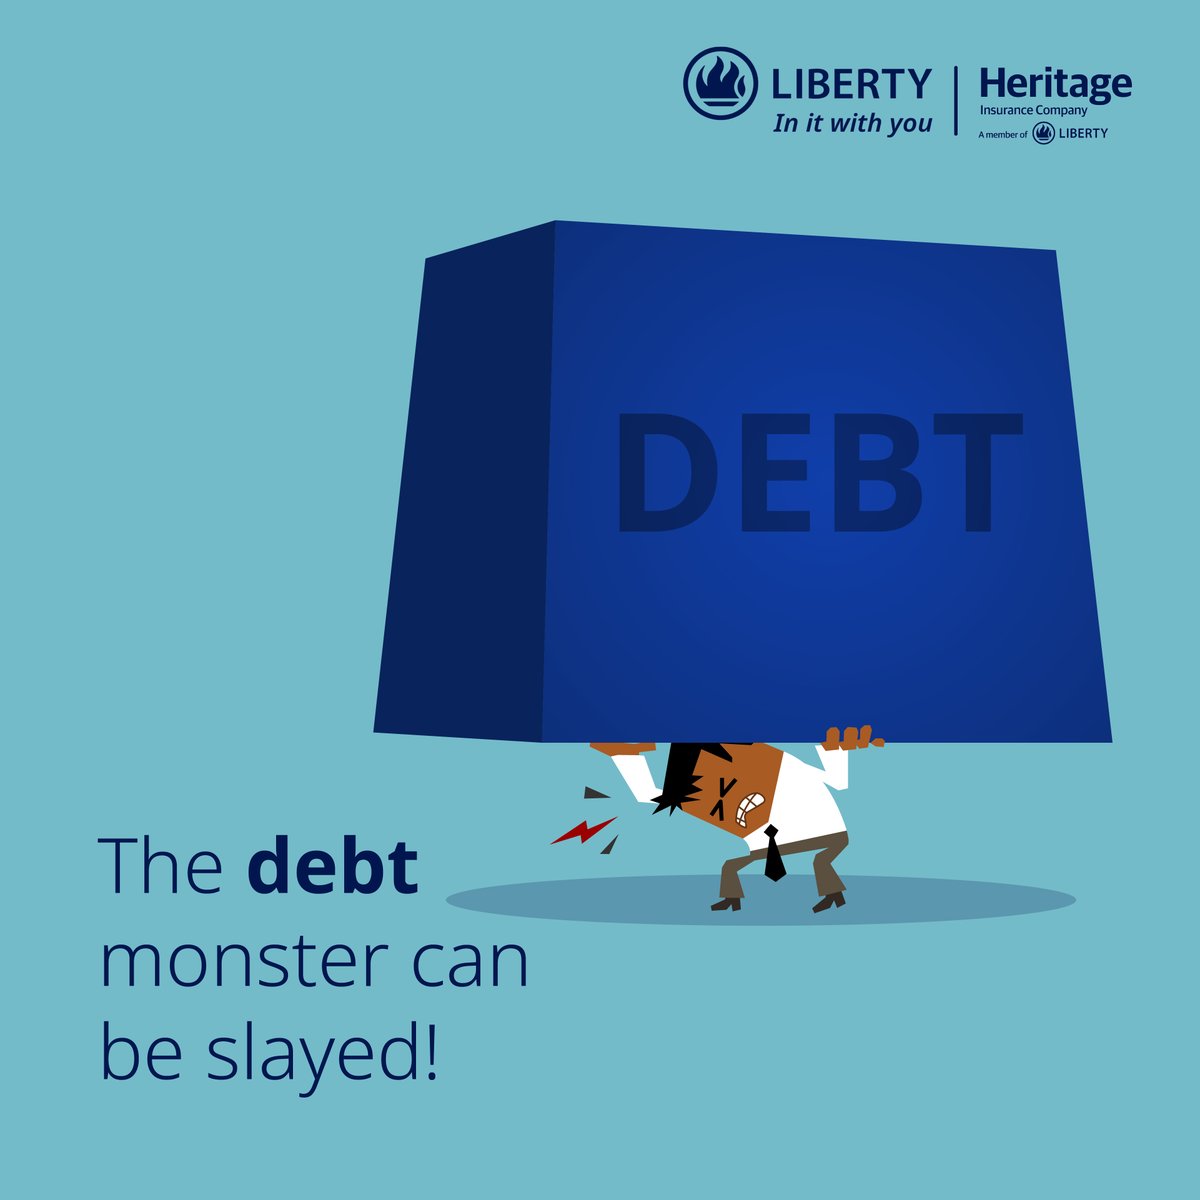 So, you have debt and you are trying to figure out how to pay it off. Here are 4 strategies you can use to tackle your debt.
#Debt #DebtManagement  #FinancialJourney #FinancialFreedom #LibertyLife #HeritageInsurance